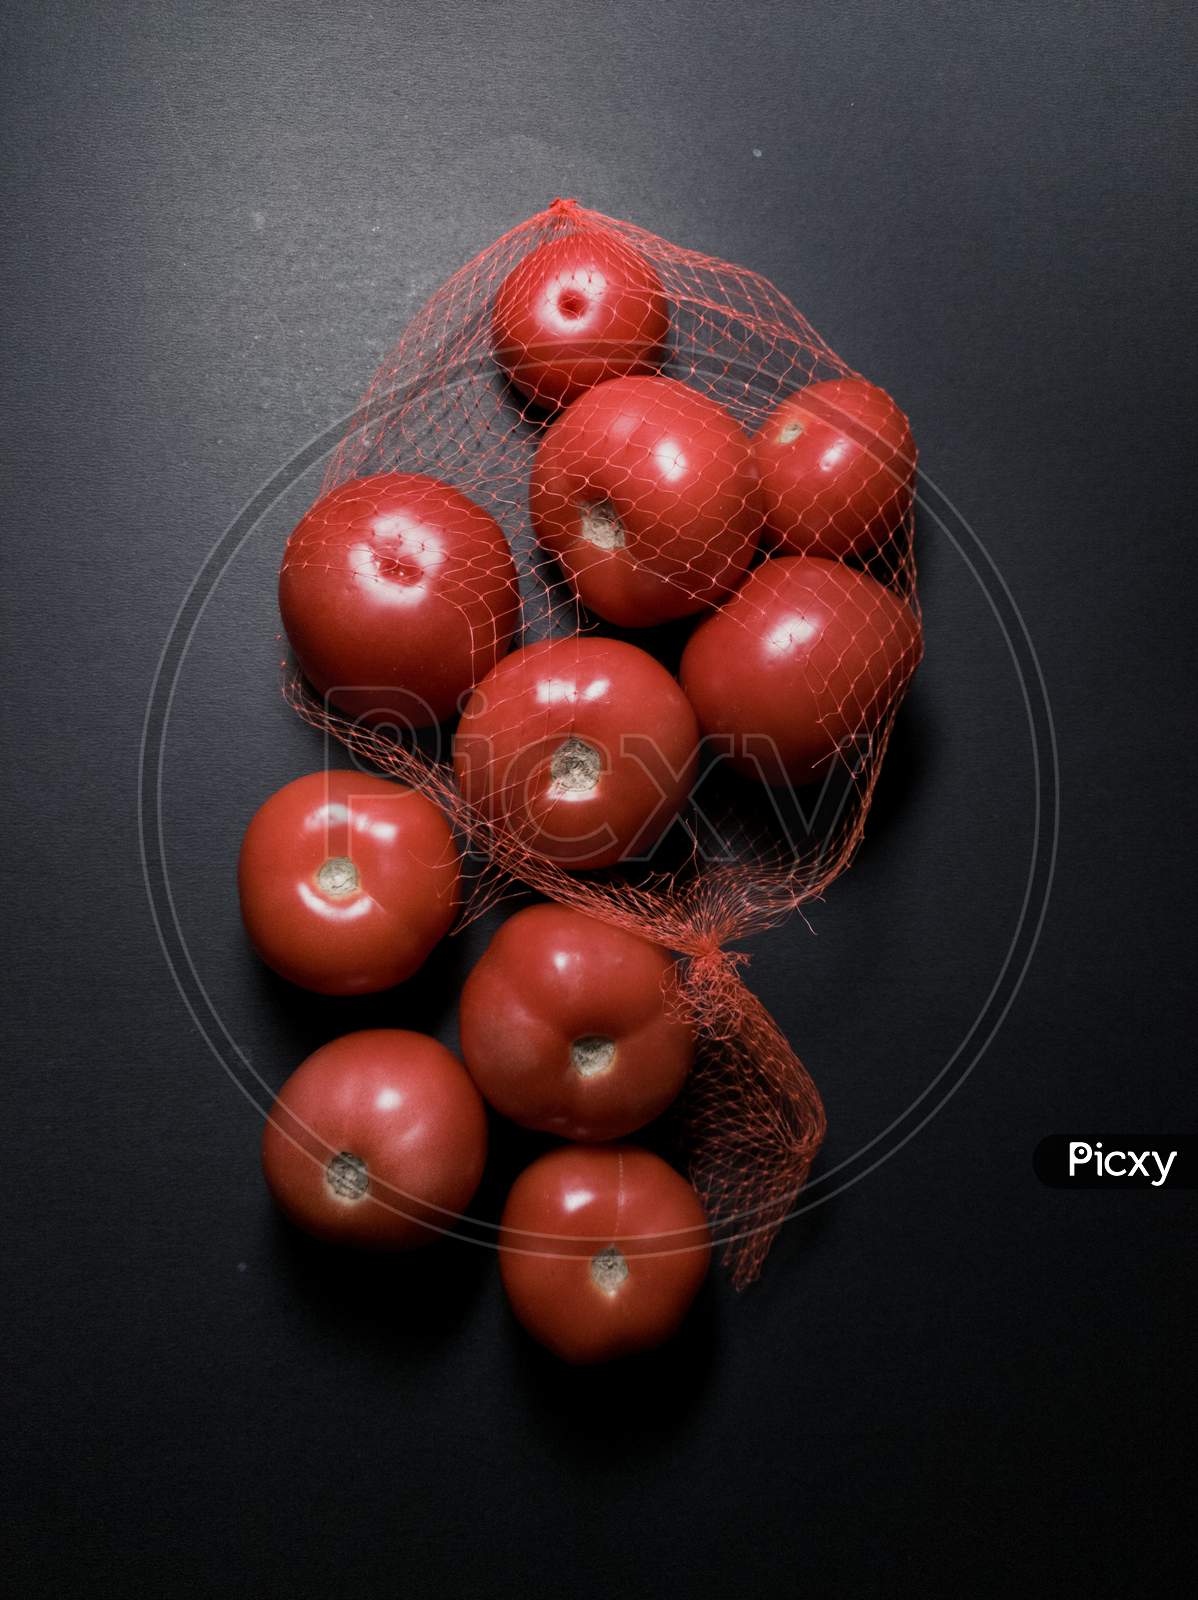 Red tomatoes in dark and moody background